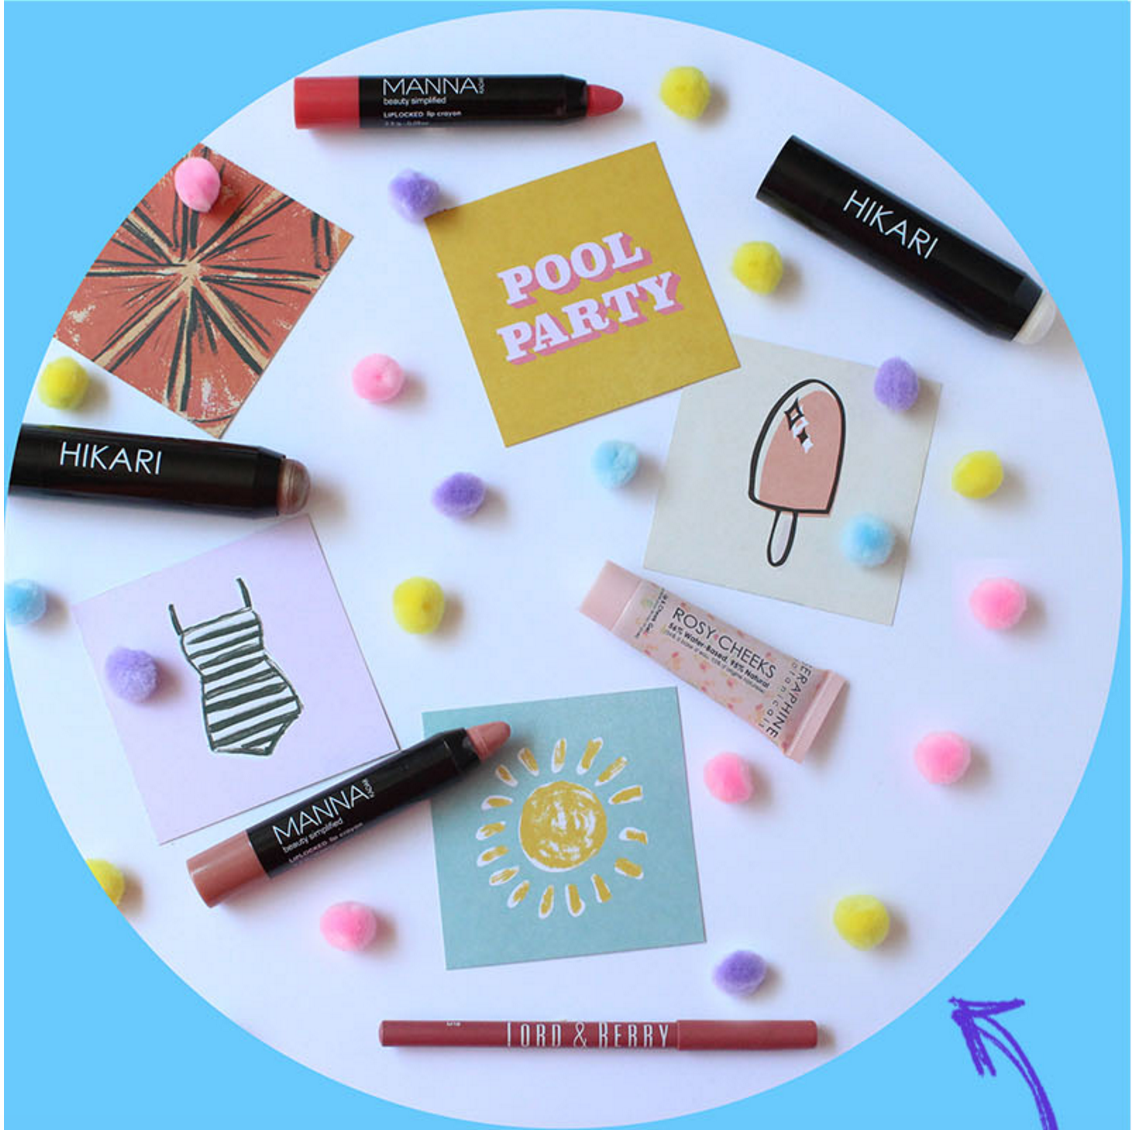 Lip Monthly is Adding Customization + First Box for $5!